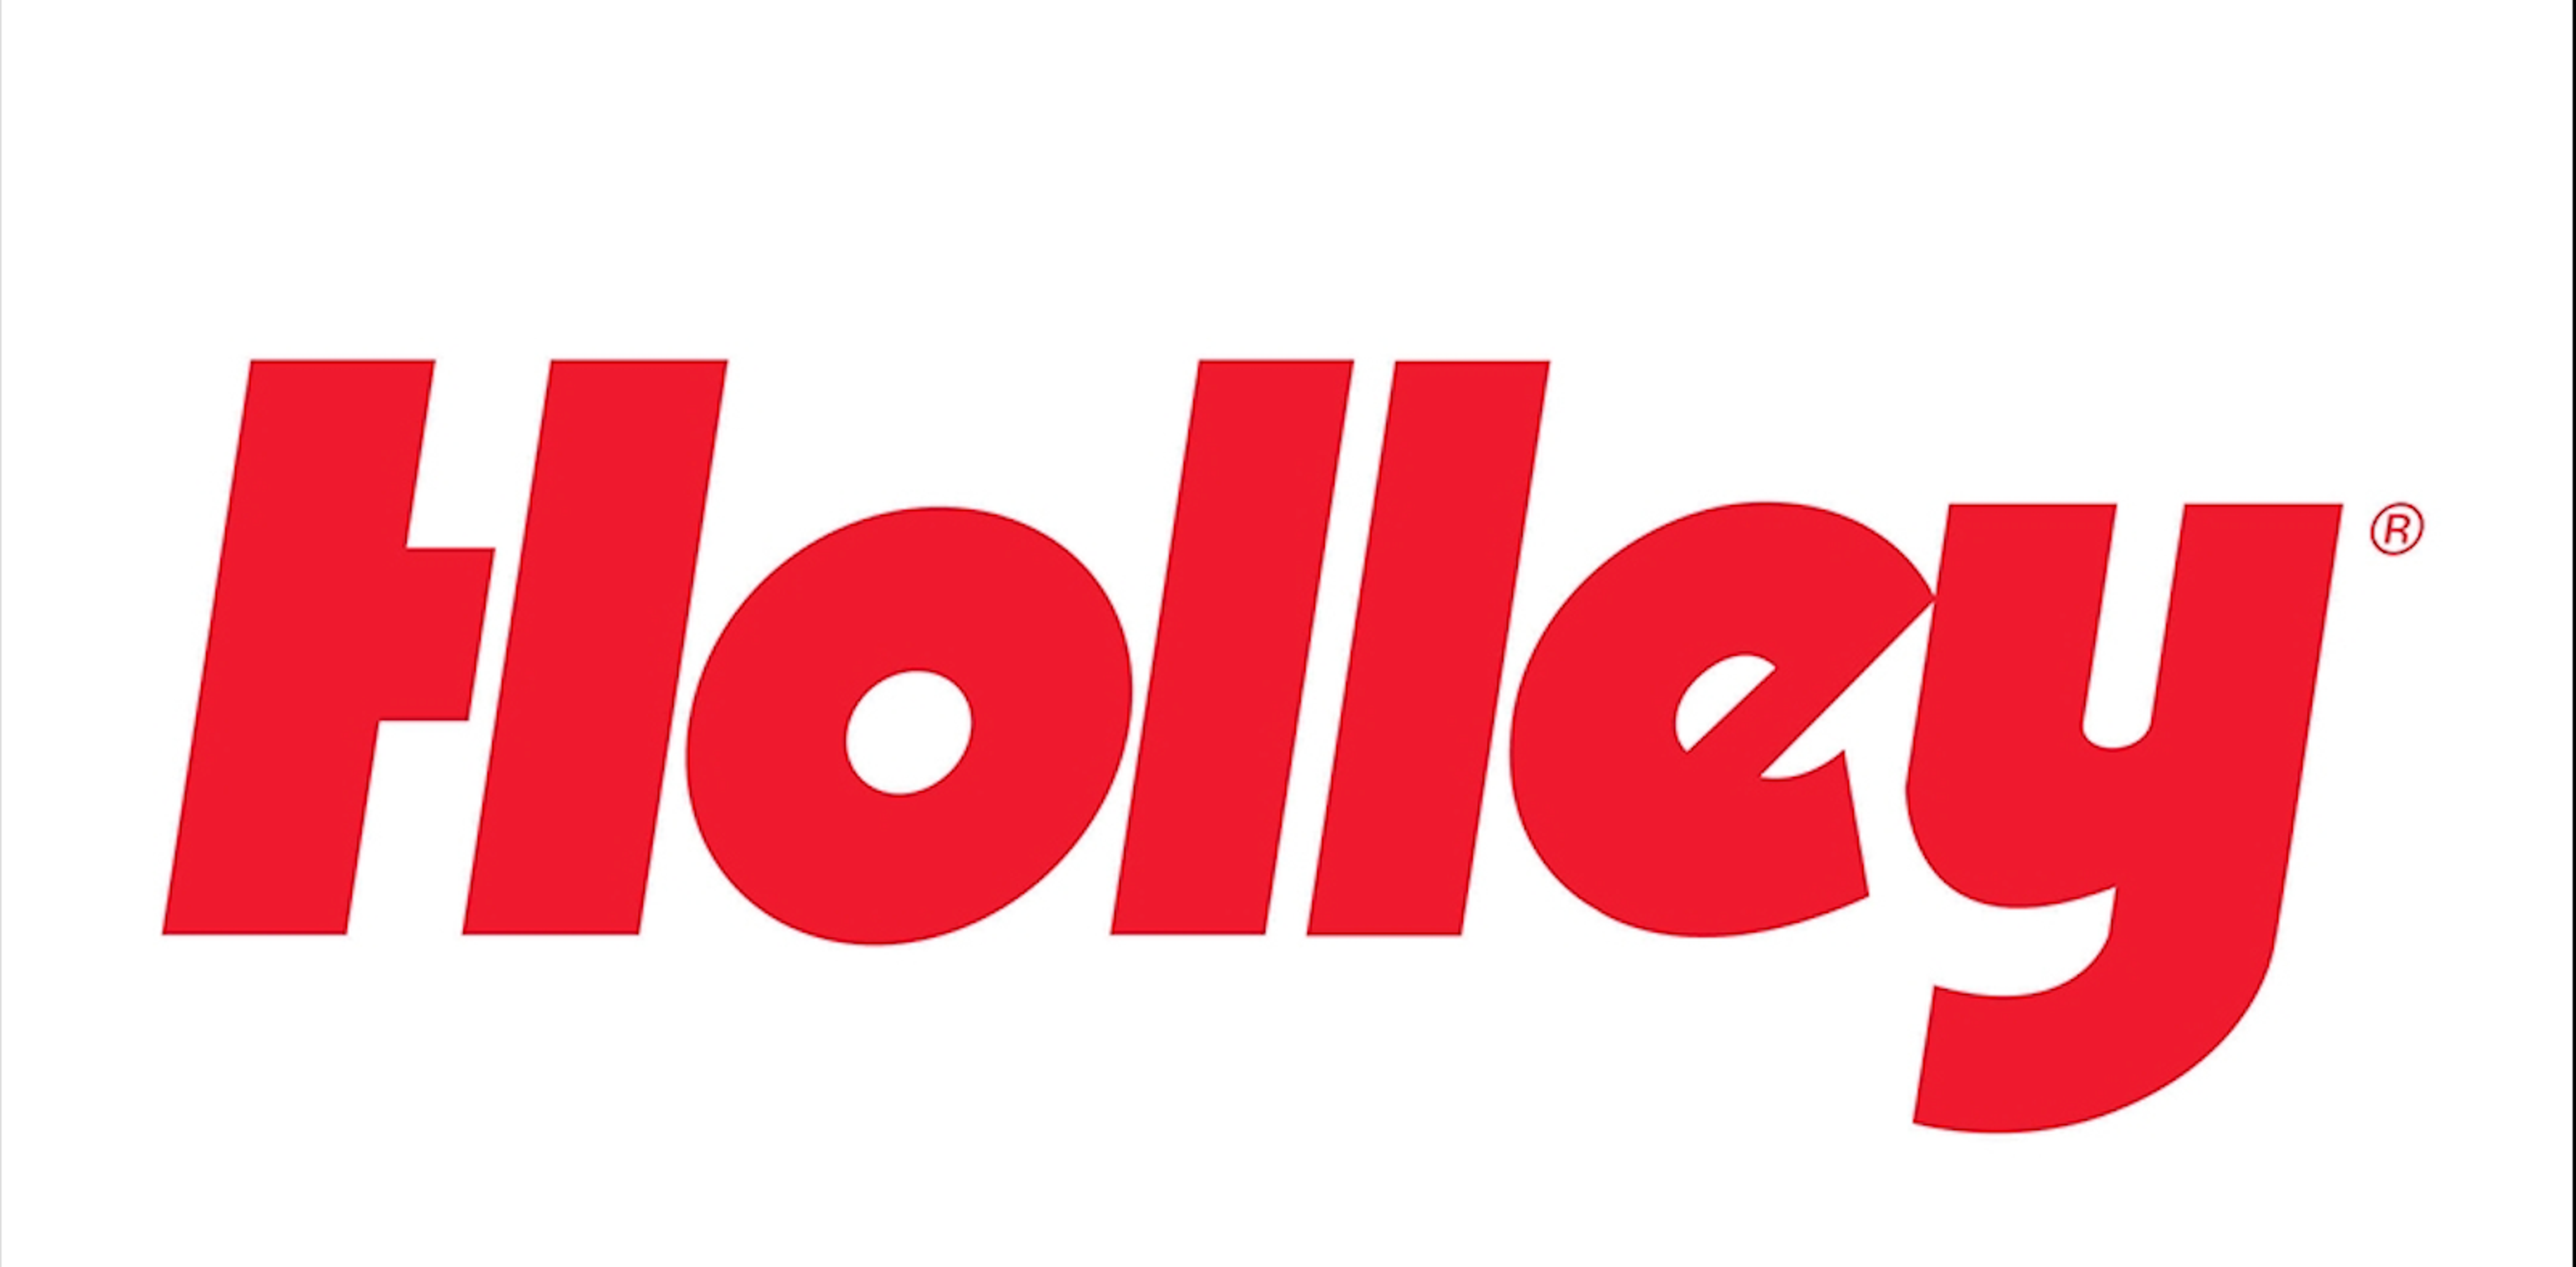 Auto Aftermarket Company Holley Has A &#39;Buy&#39; Rating And A &#39;Strong Portfolio,&#39; Analyst Says